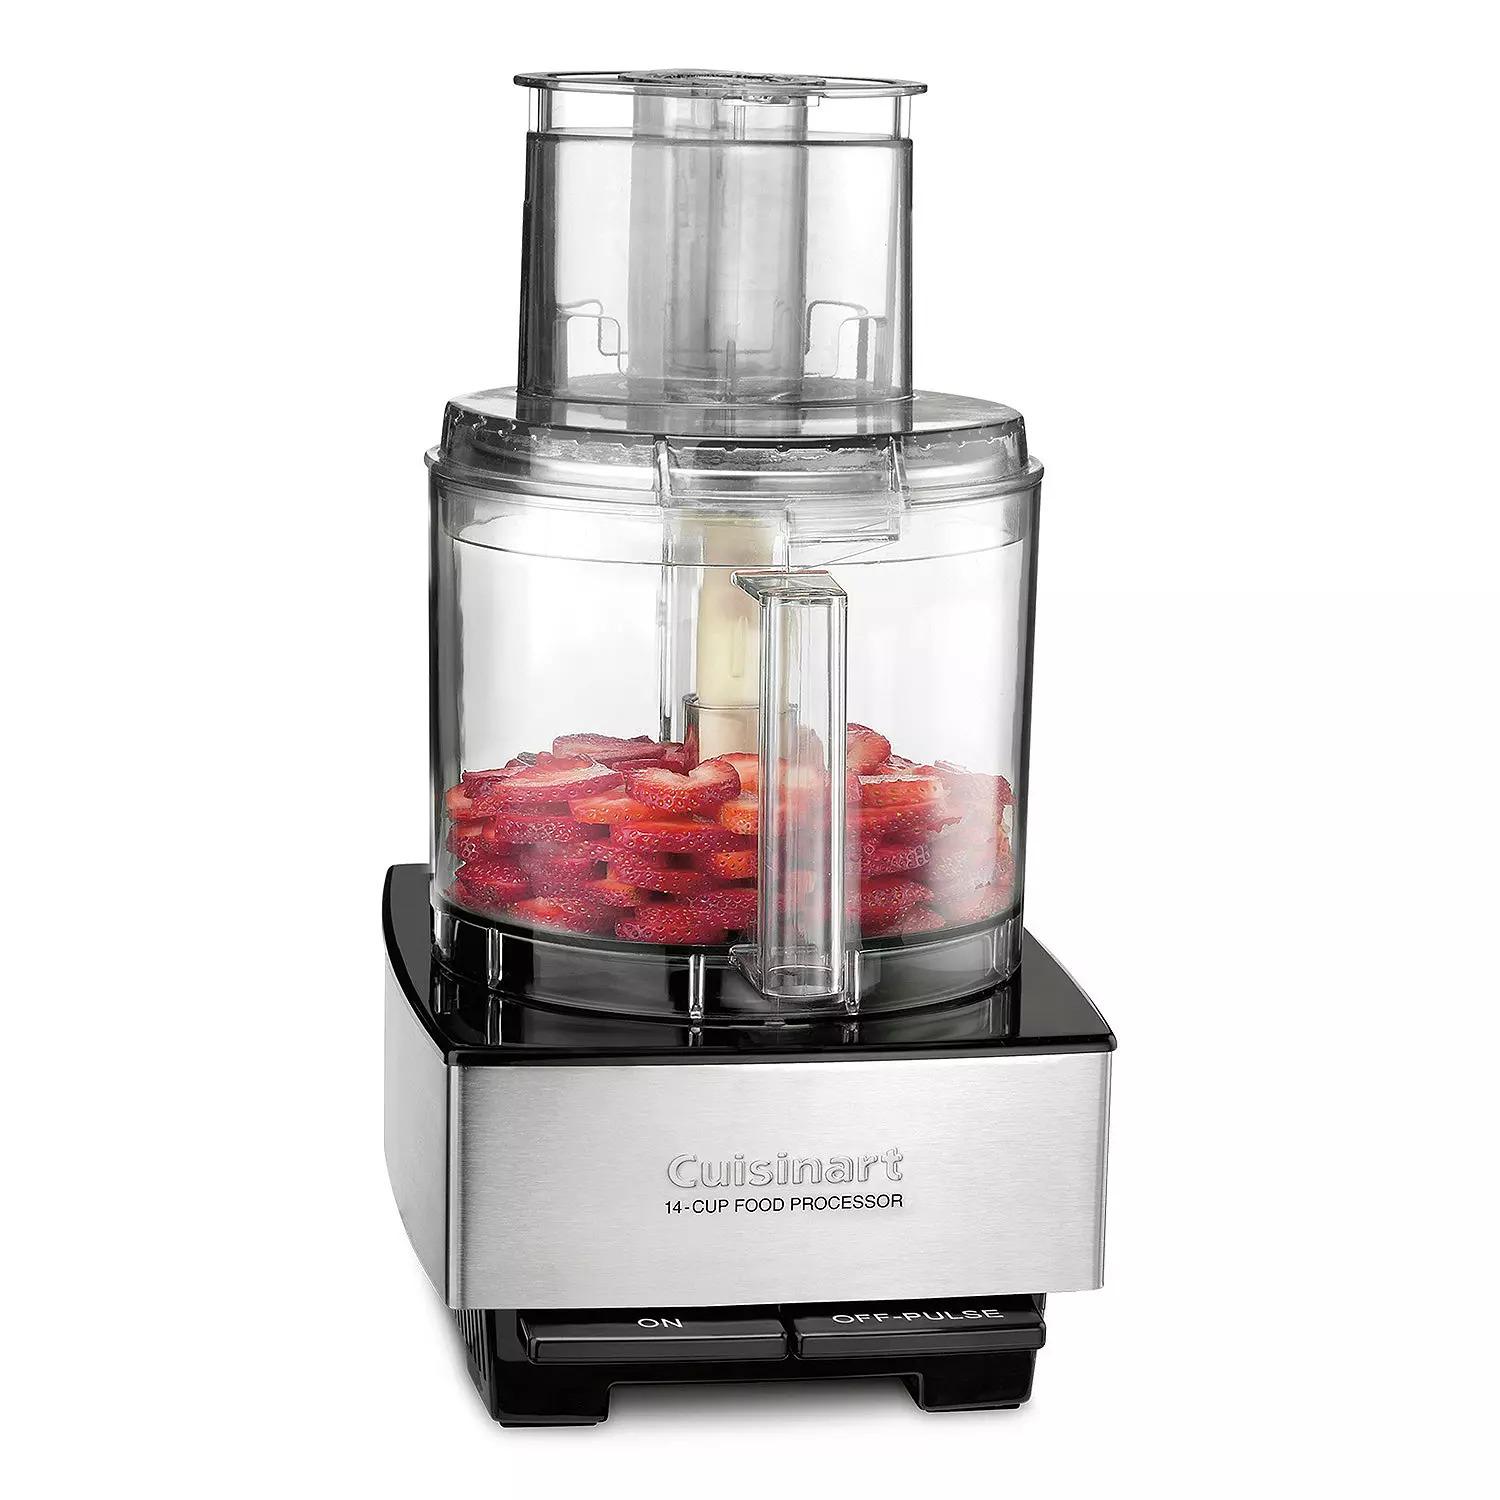 Cuisinart 14-Cup Food Processor + $30 Kohls Cash for $135.99 Shipped